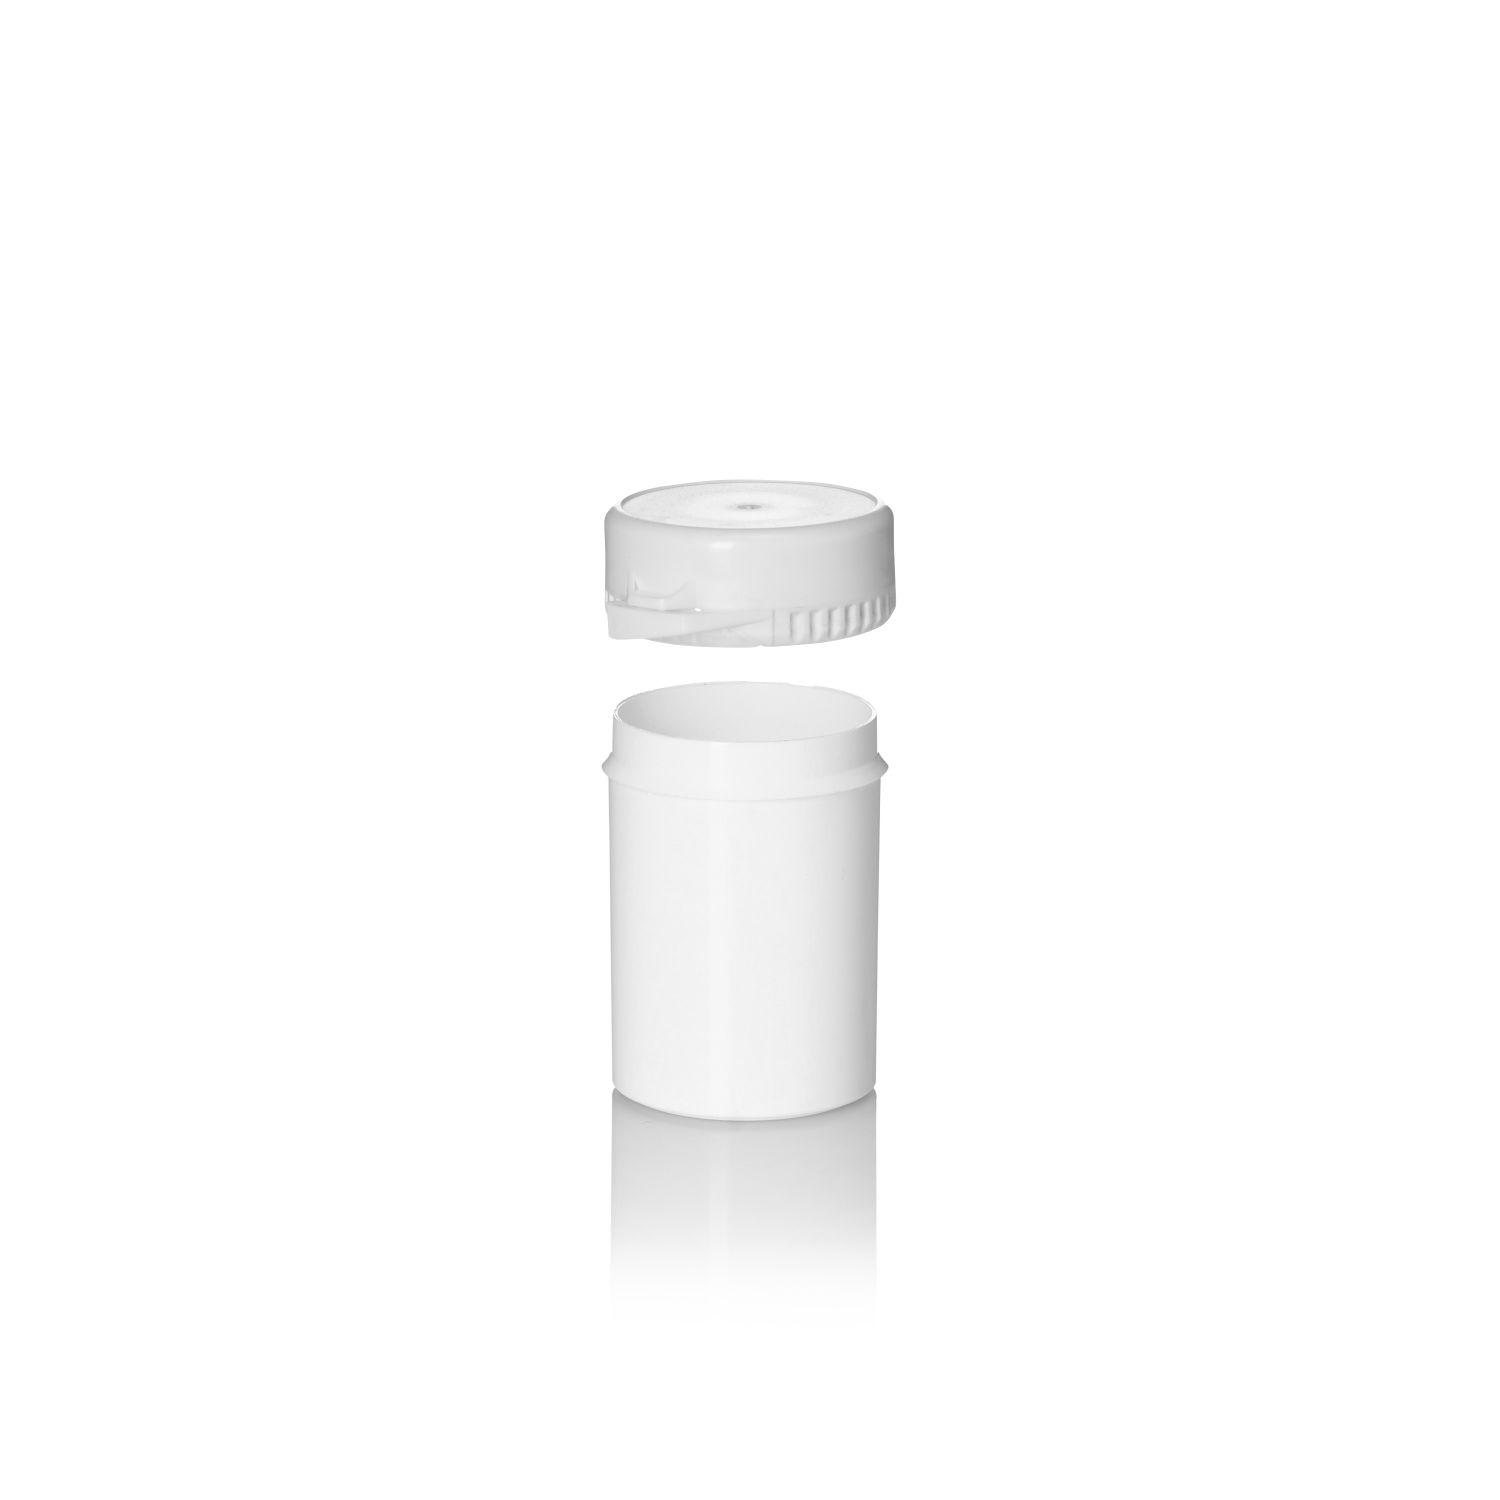 Supplier Of White PP Tamper Evident Lid to suit RSS100, RSS130 and RSS160